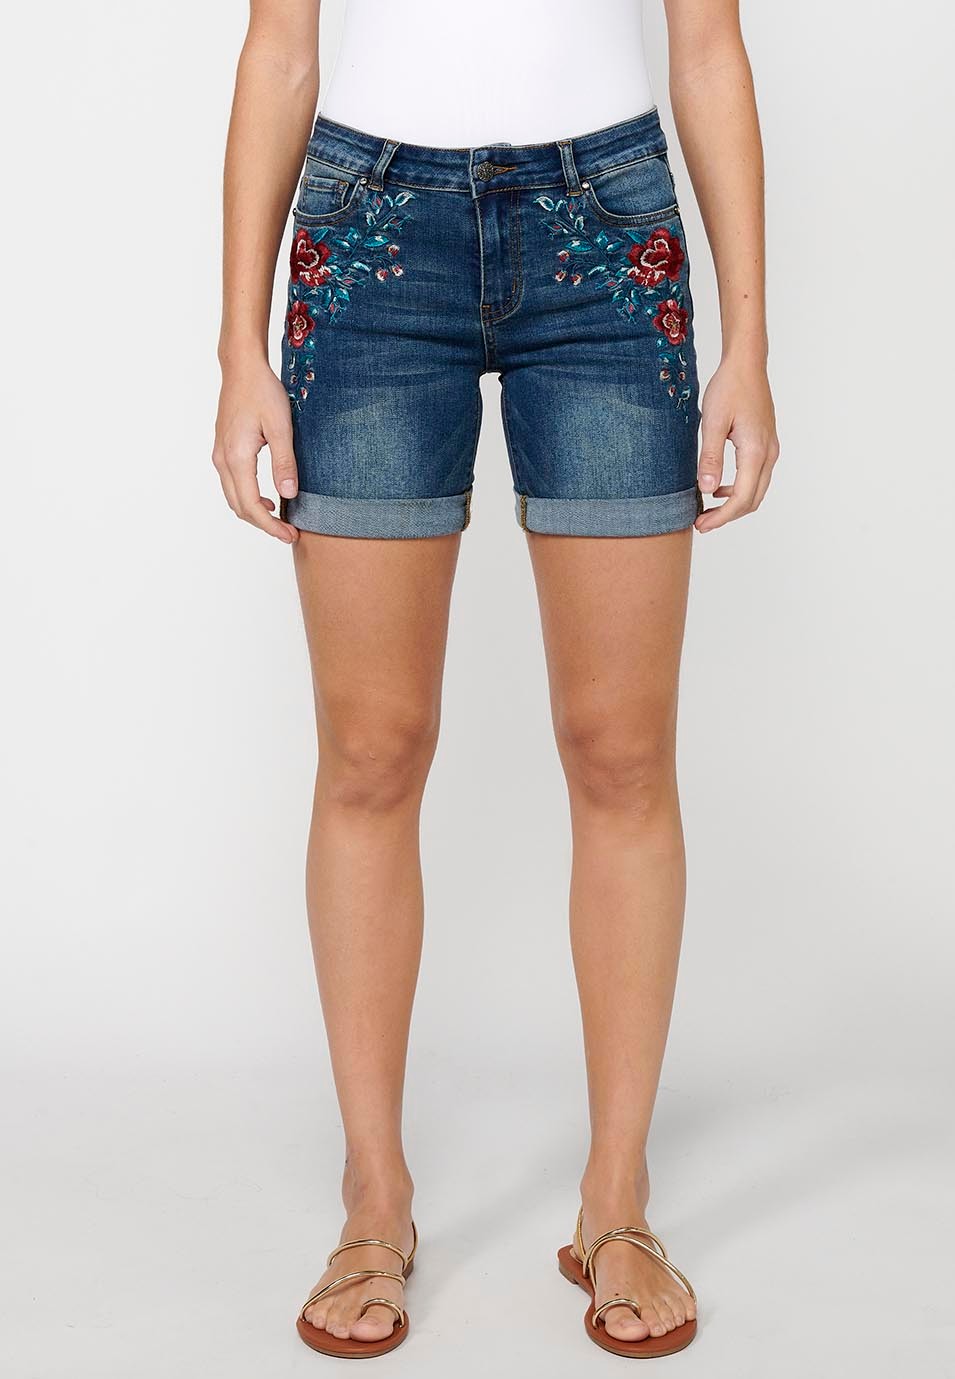 Denim shorts with front zipper and button closure and front floral embroidered details with five pockets, one pocket pocket, Dark Blue for Women 3